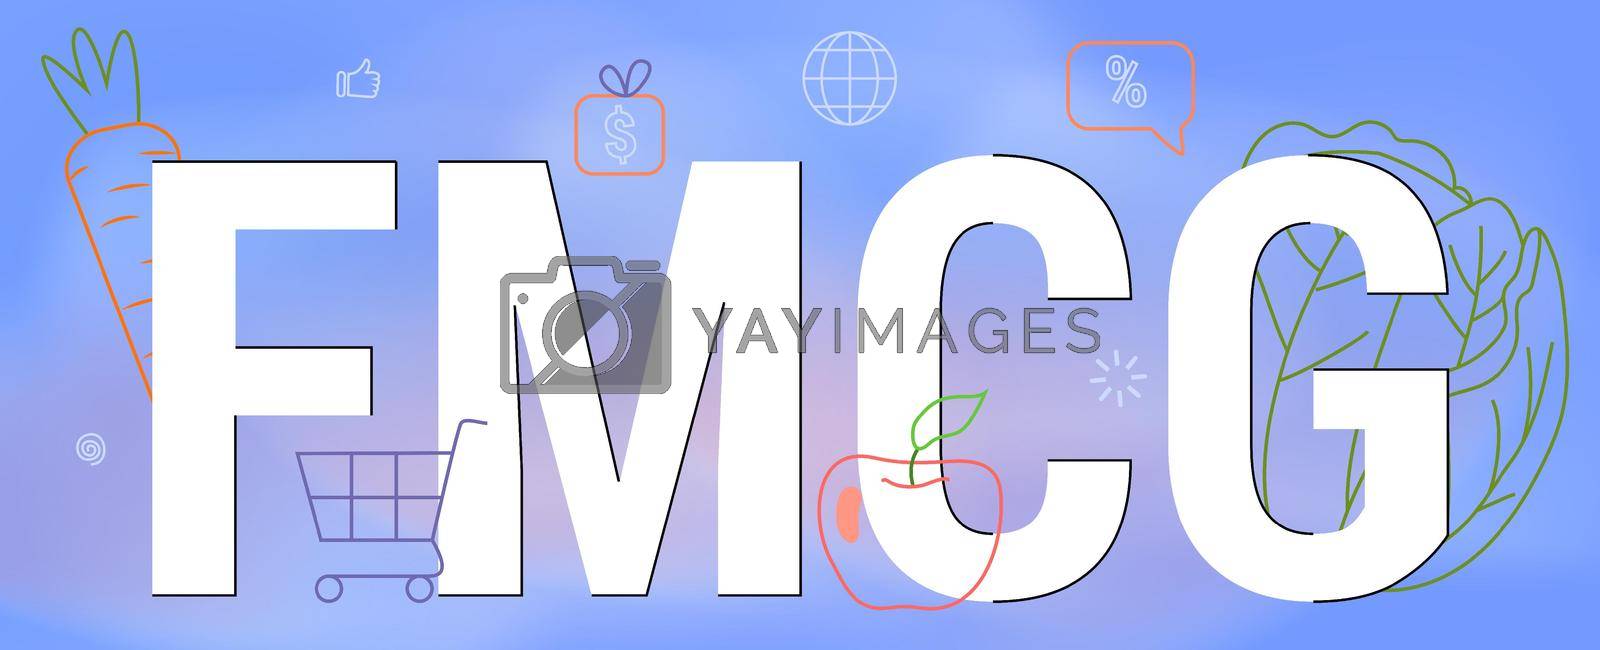 Royalty free image of FMCG Fast moving consumer goods acronym Business and commerce concept by JulsIst